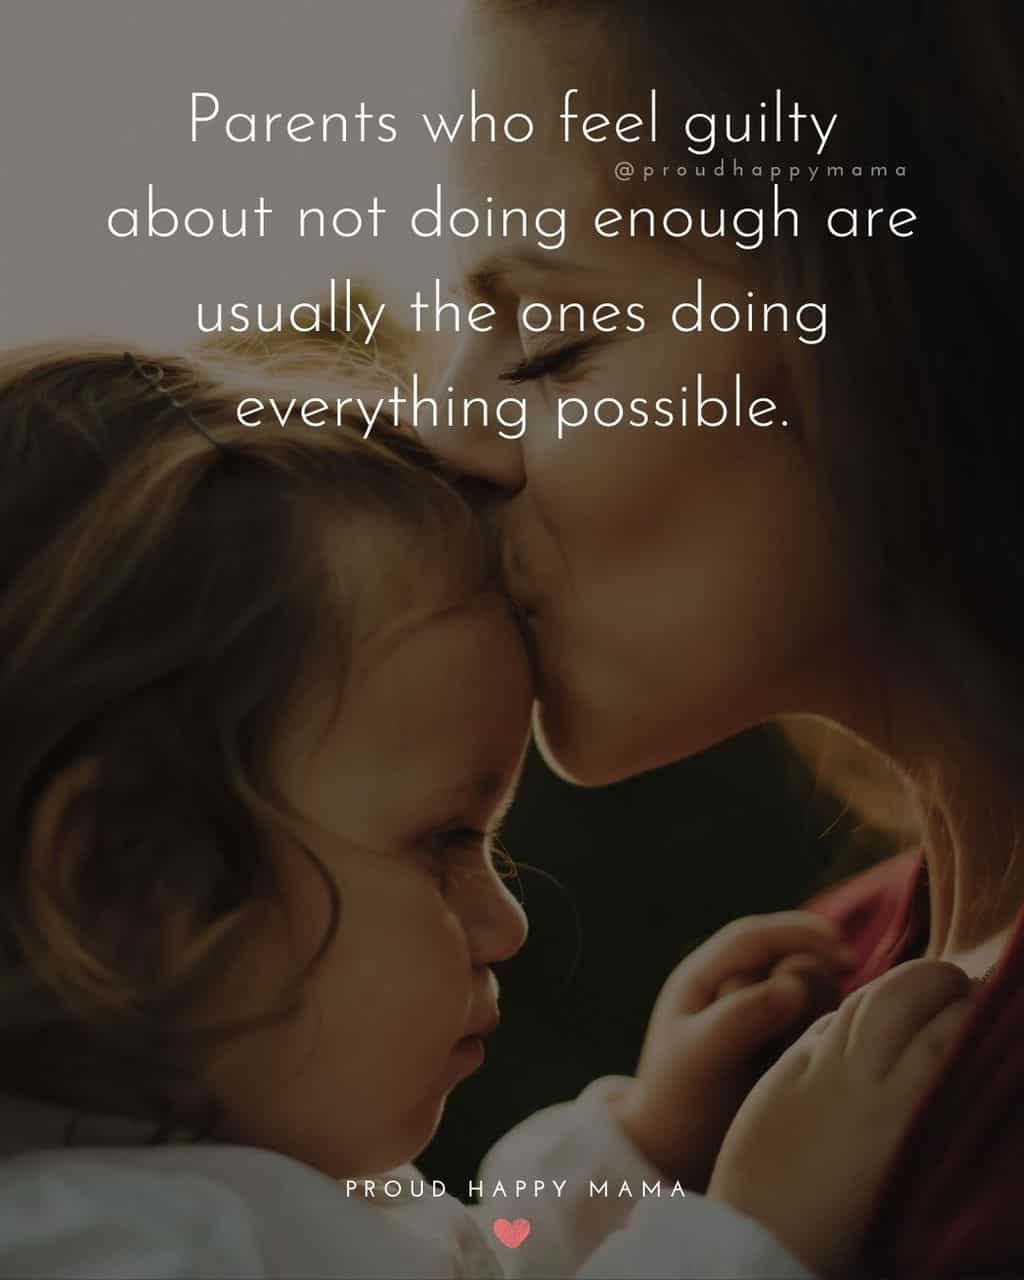 Parenting Quotes - Parents who feel guilty about not doing enough are usually the ones doing everything possible.’